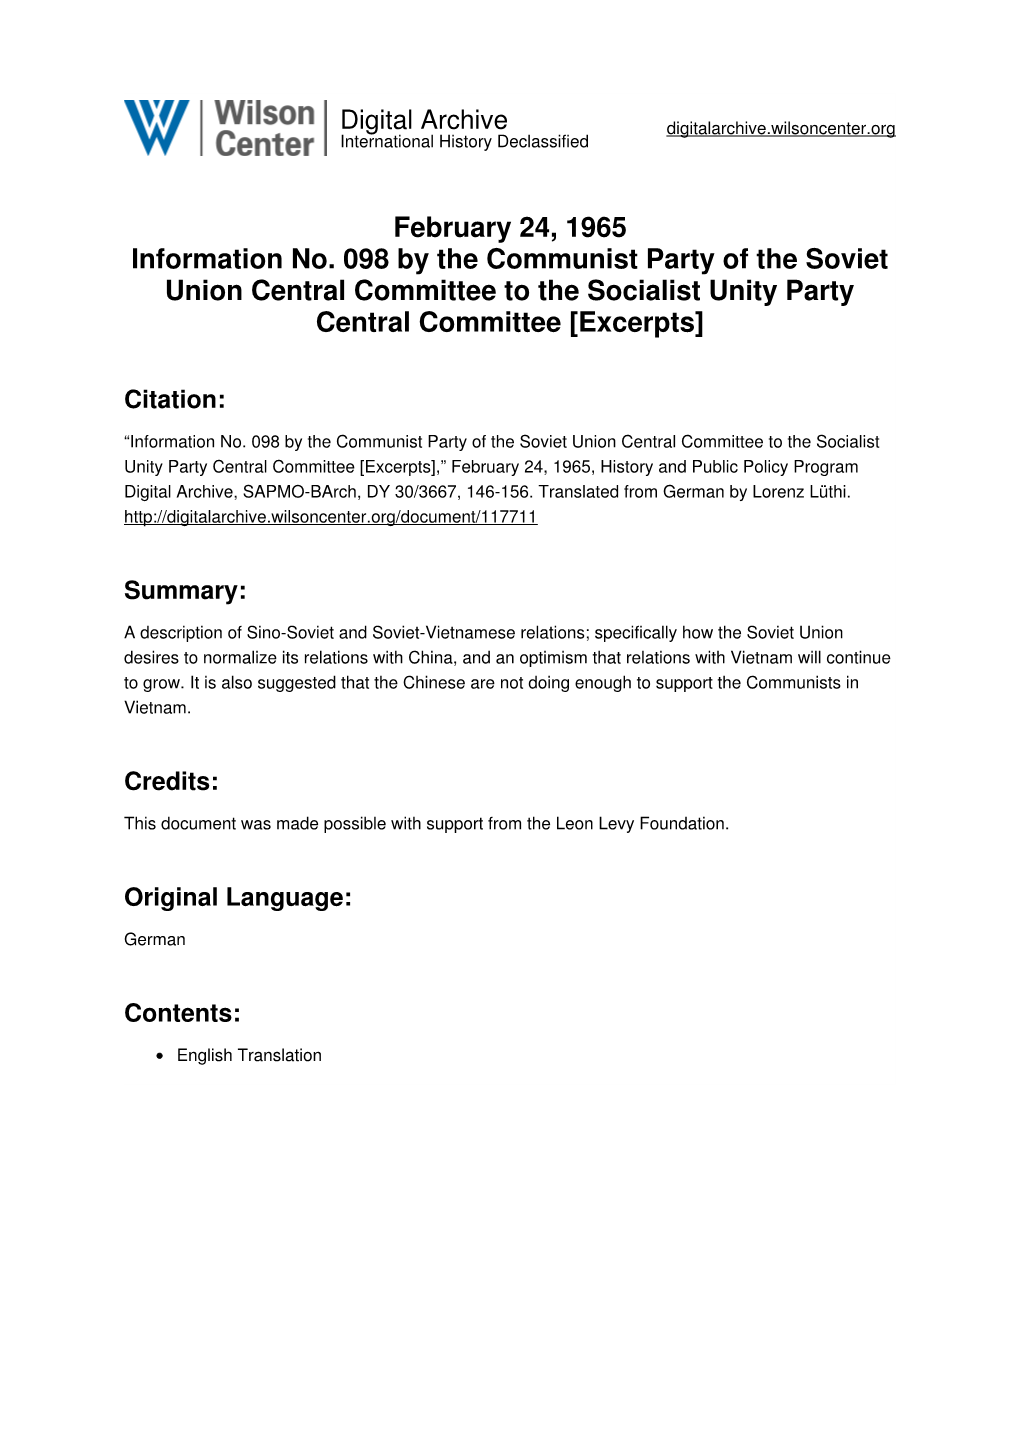 February 24, 1965 Information No. 098 by the Communist Party of the Soviet Union Central Committee to the Socialist Unity Party Central Committee [Excerpts]